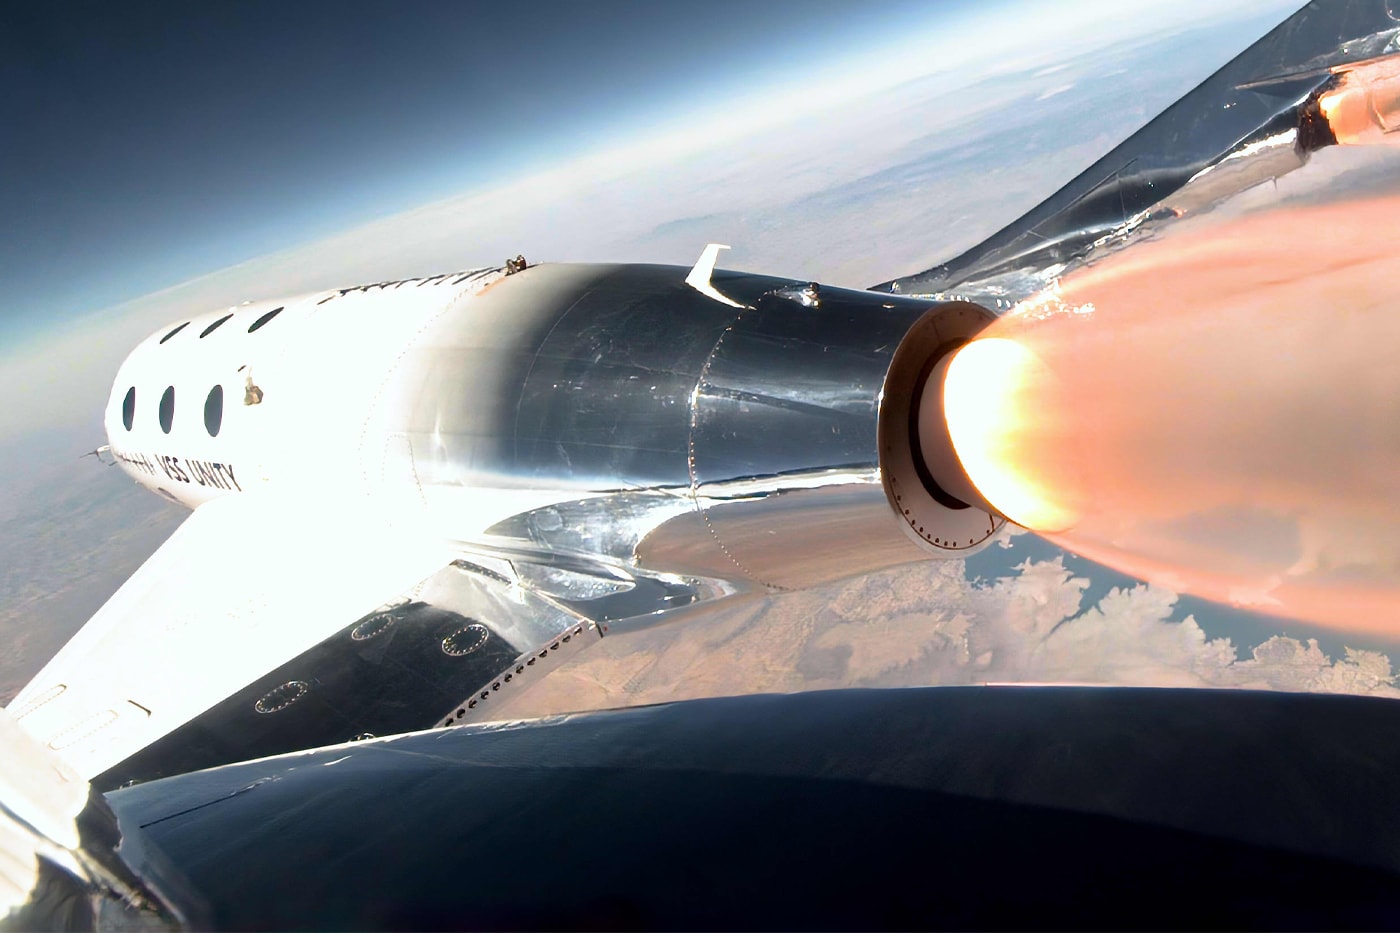 Virgin Galactic first commercial space tourism flight june 27 30 richard branson galactic 01 02 price info